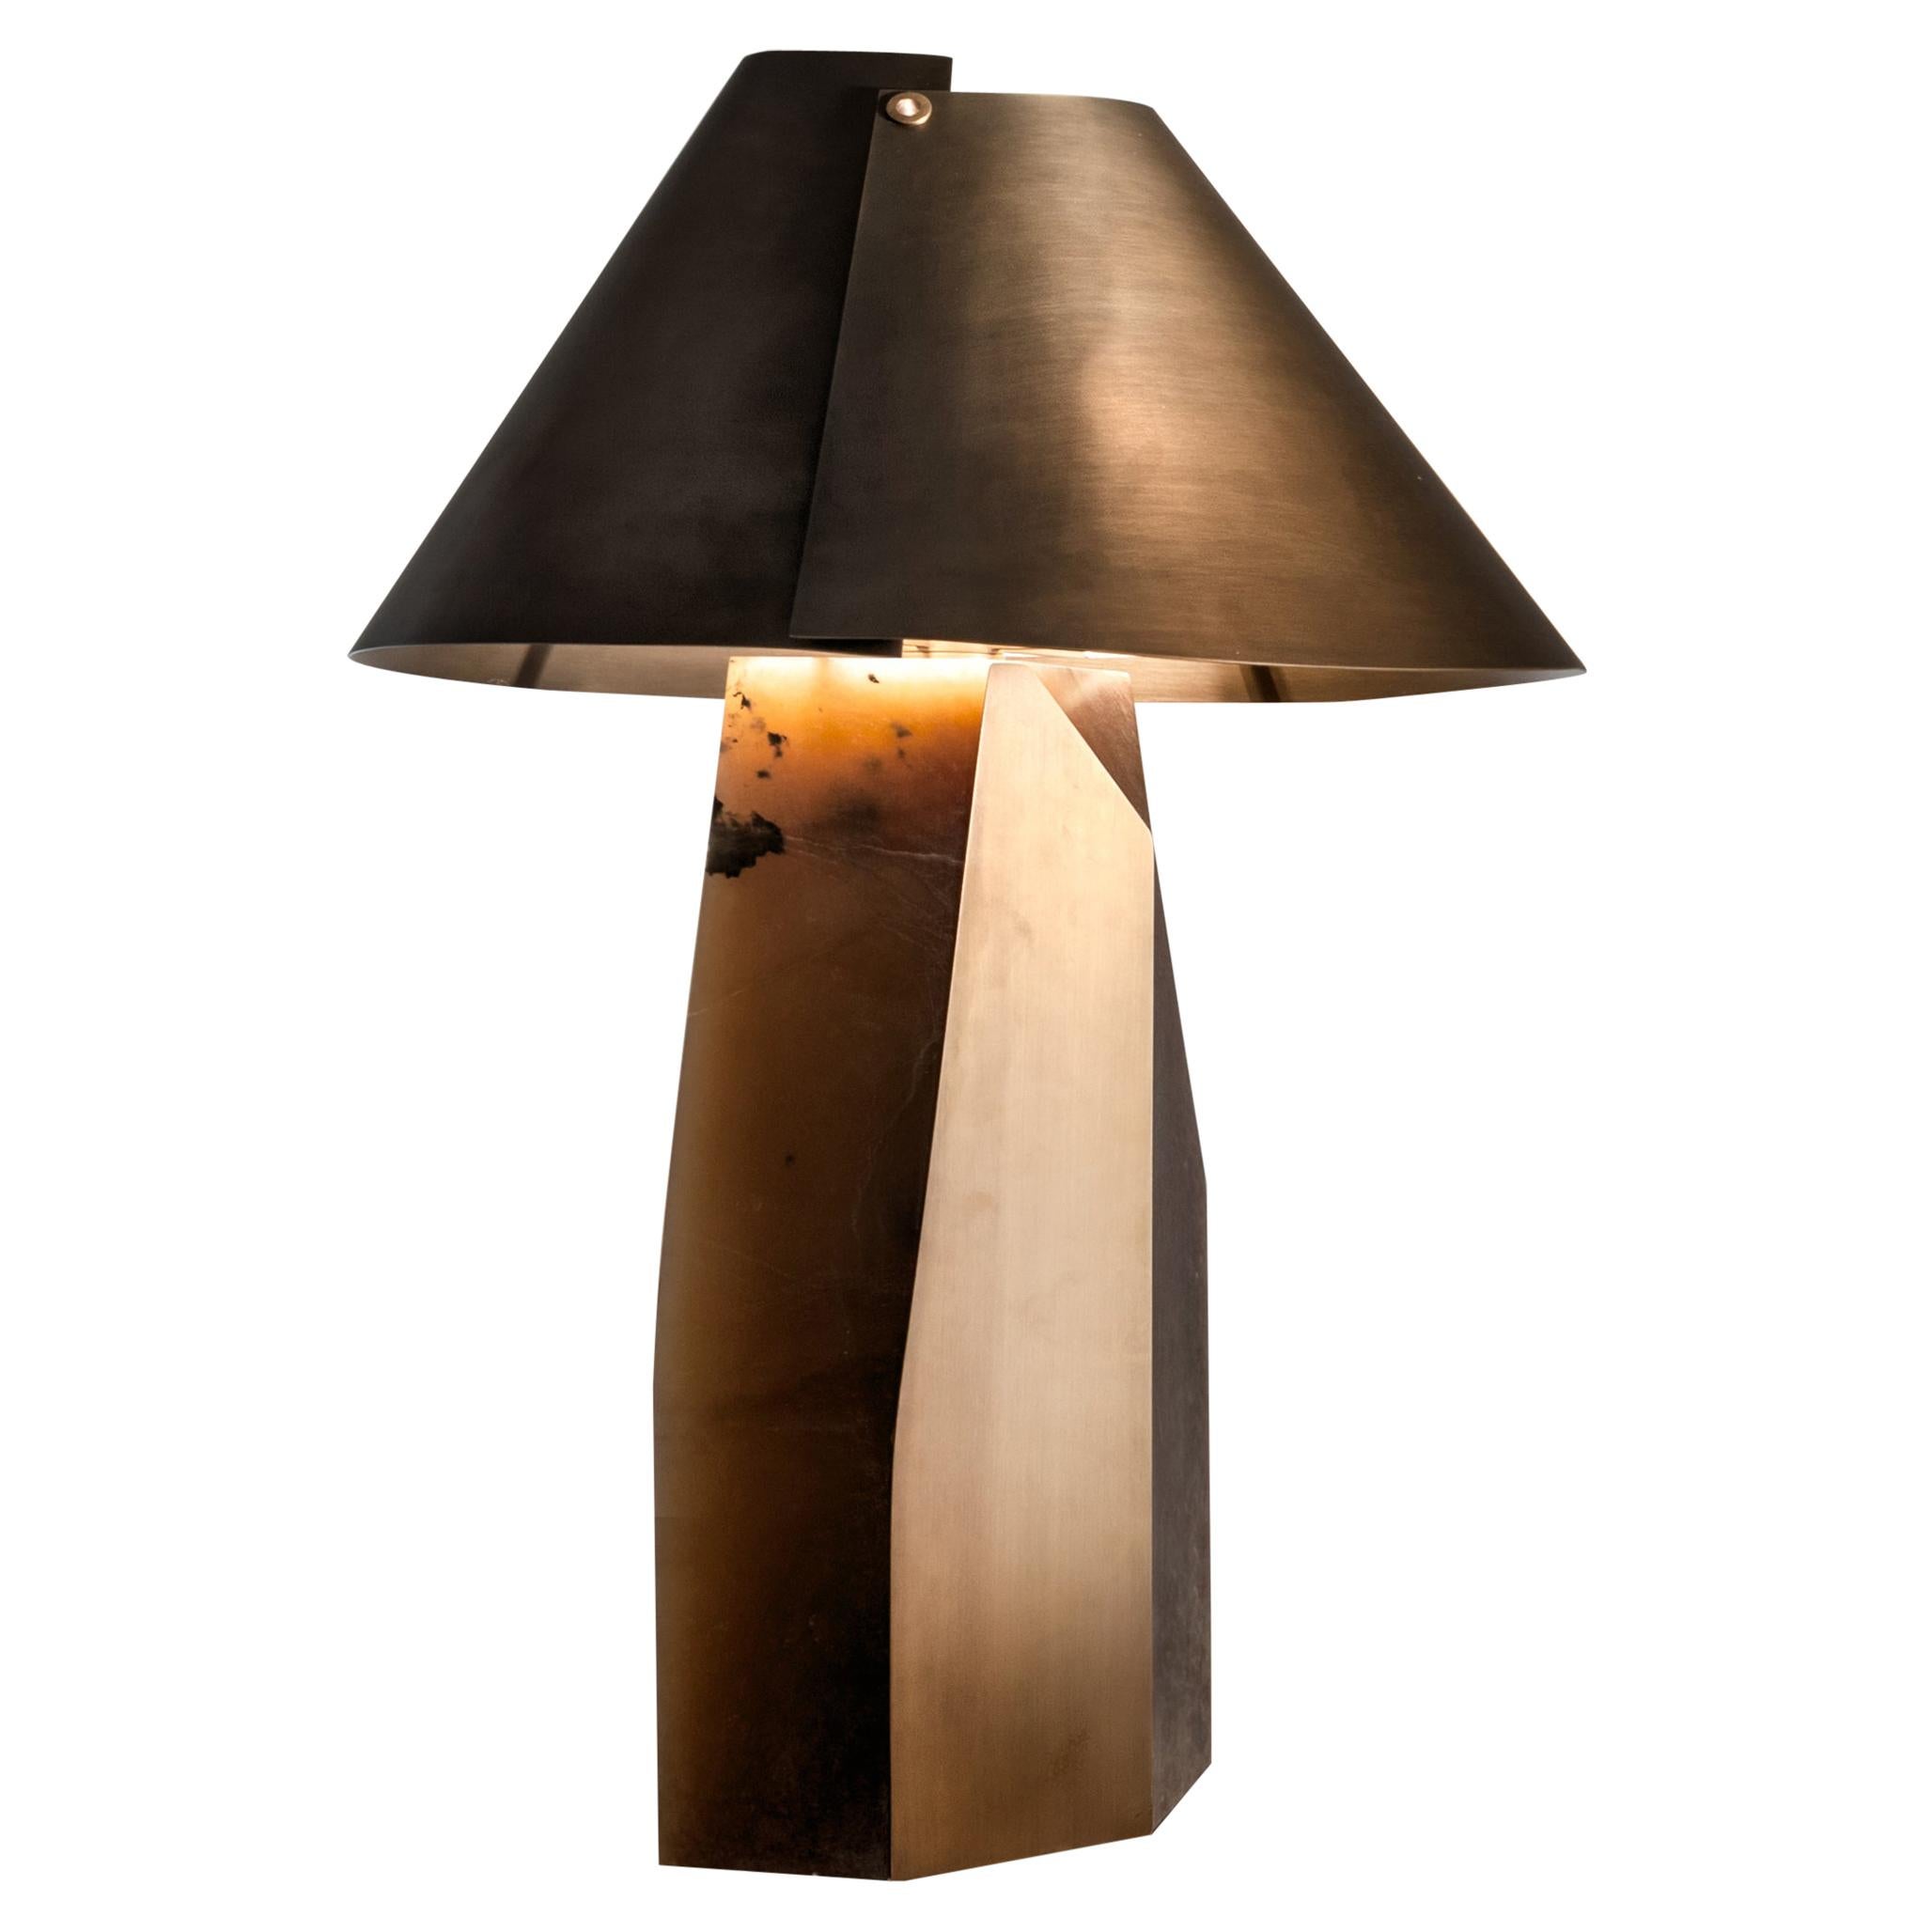 Laurameroni "Ada" Table Lamp in Alabaster and Brass by Cesare Arosio